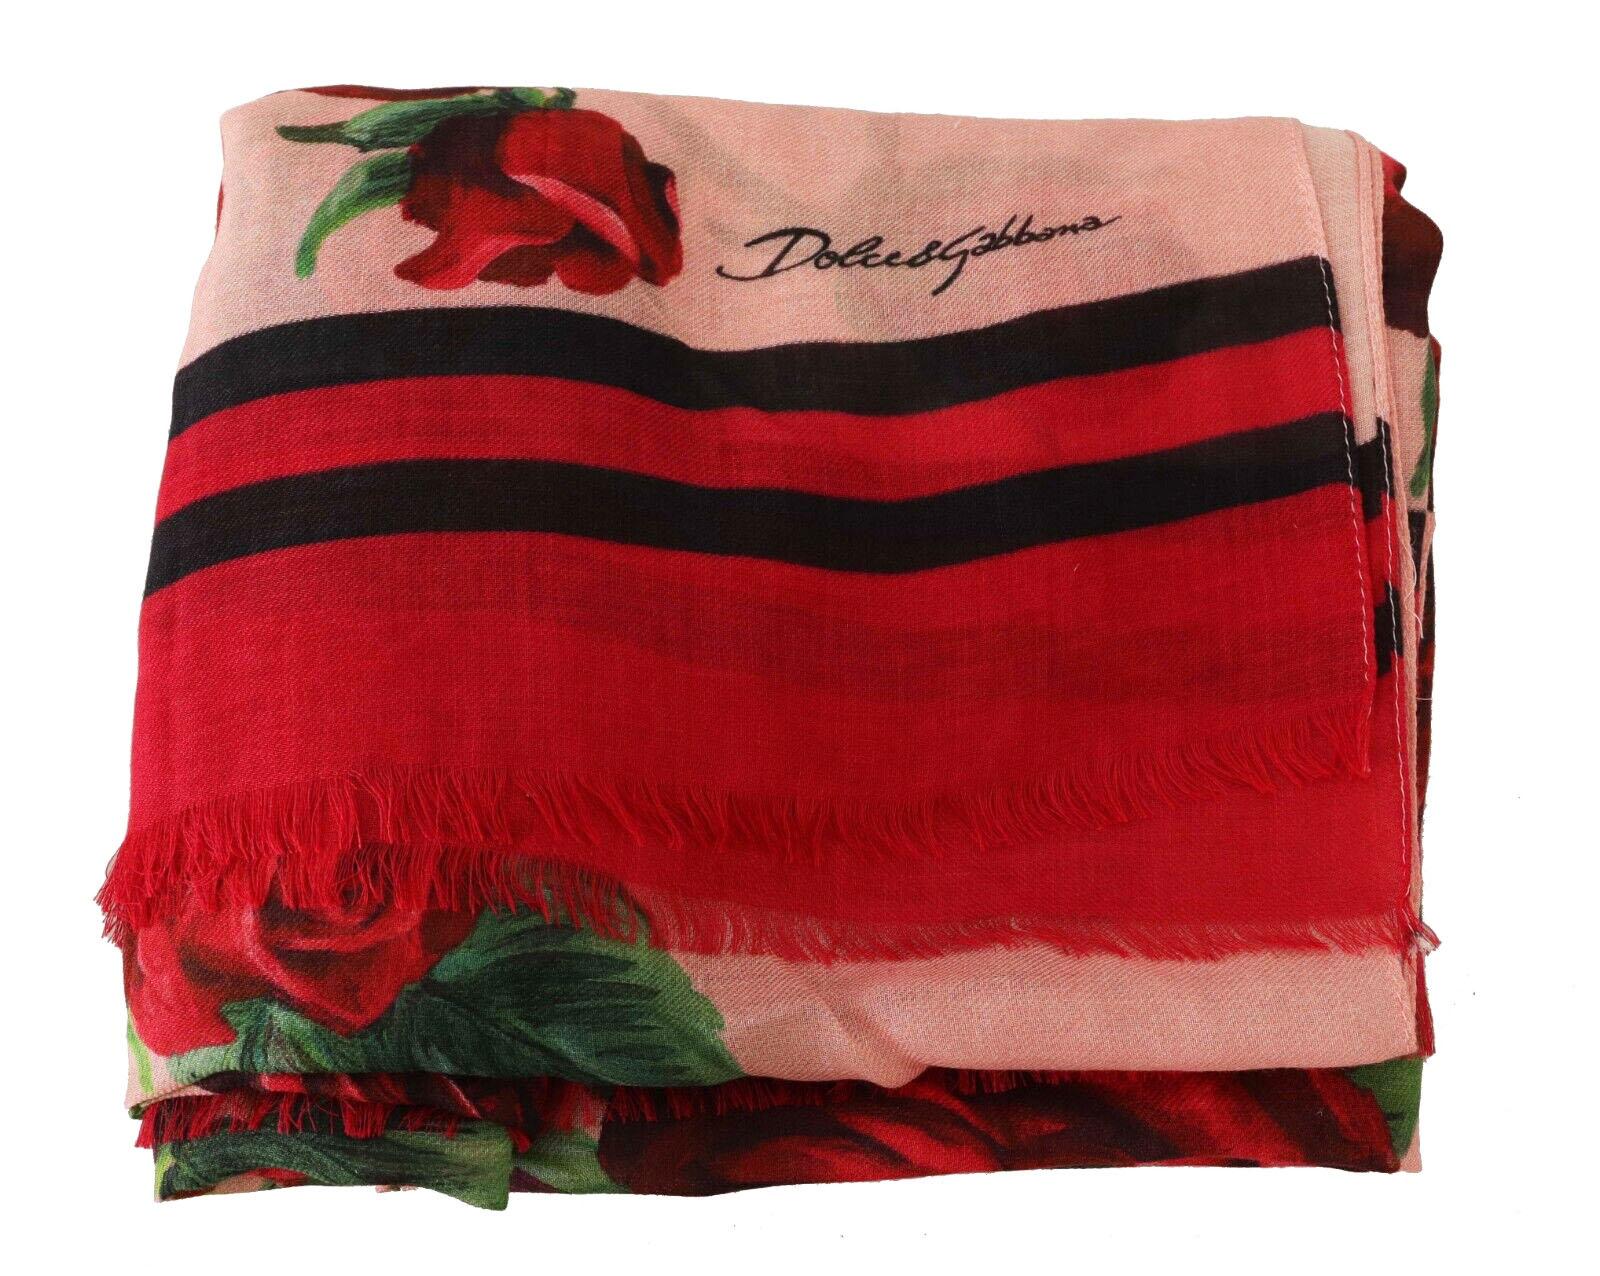 Dolce & Gabbana Red Modal Cashmere Roses Floral Scarf Wrap Cover Up Italy DG In New Condition For Sale In WELWYN, GB